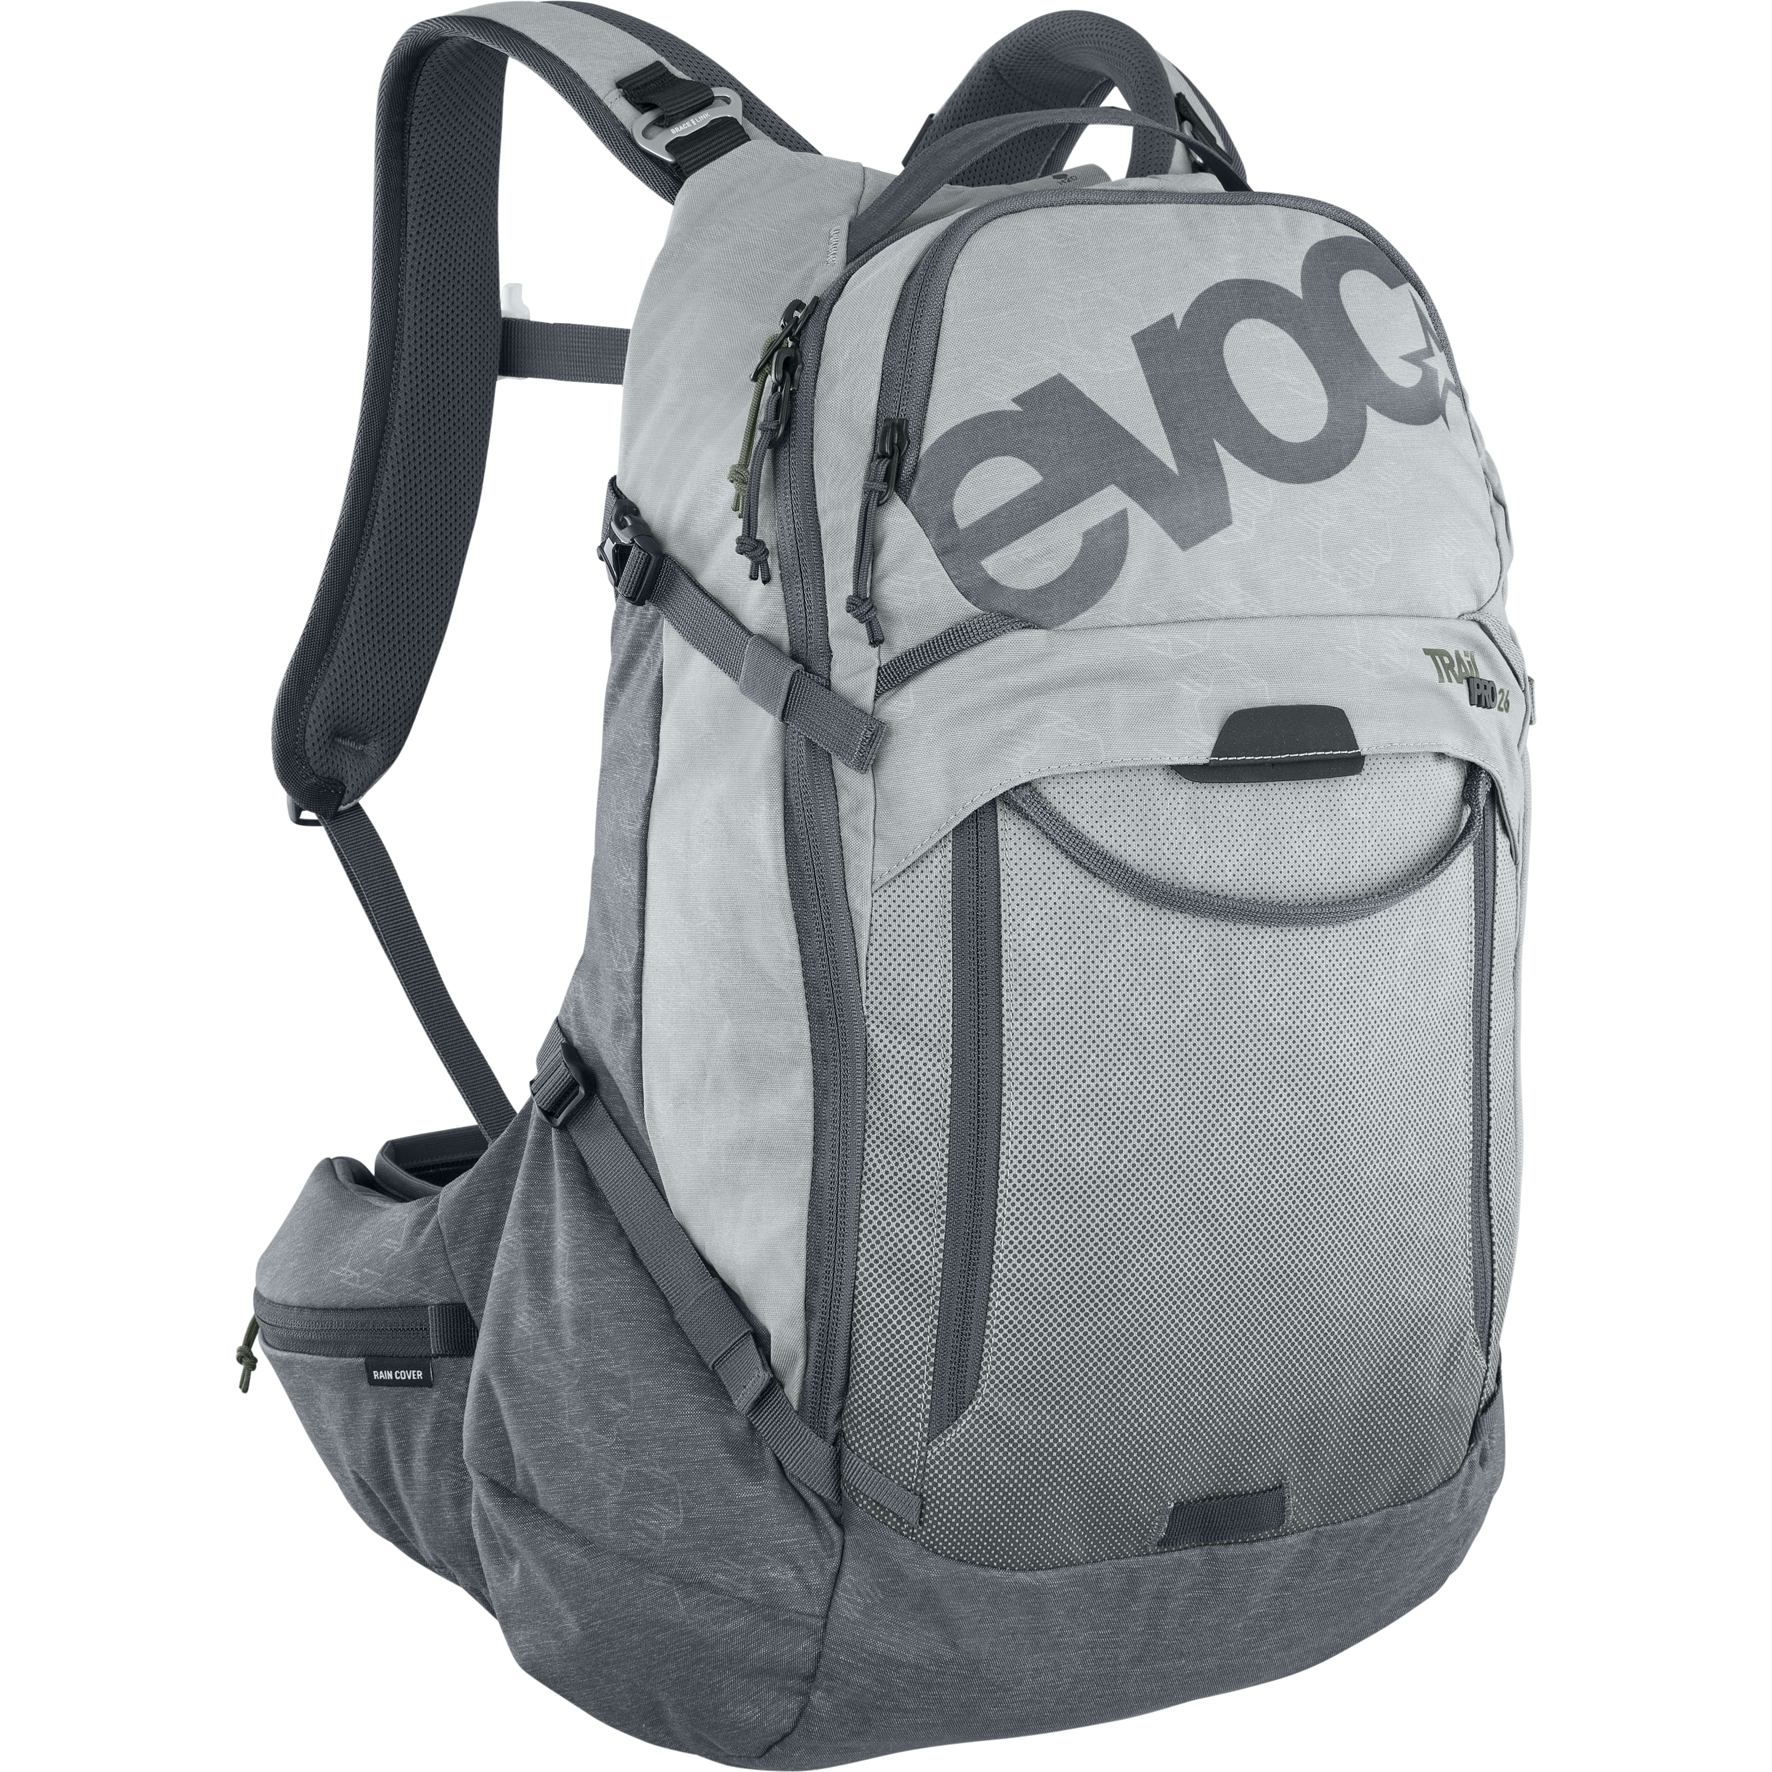 Picture of EVOC Trail Pro 26L Protector Backpack - Stone/Carbon Grey